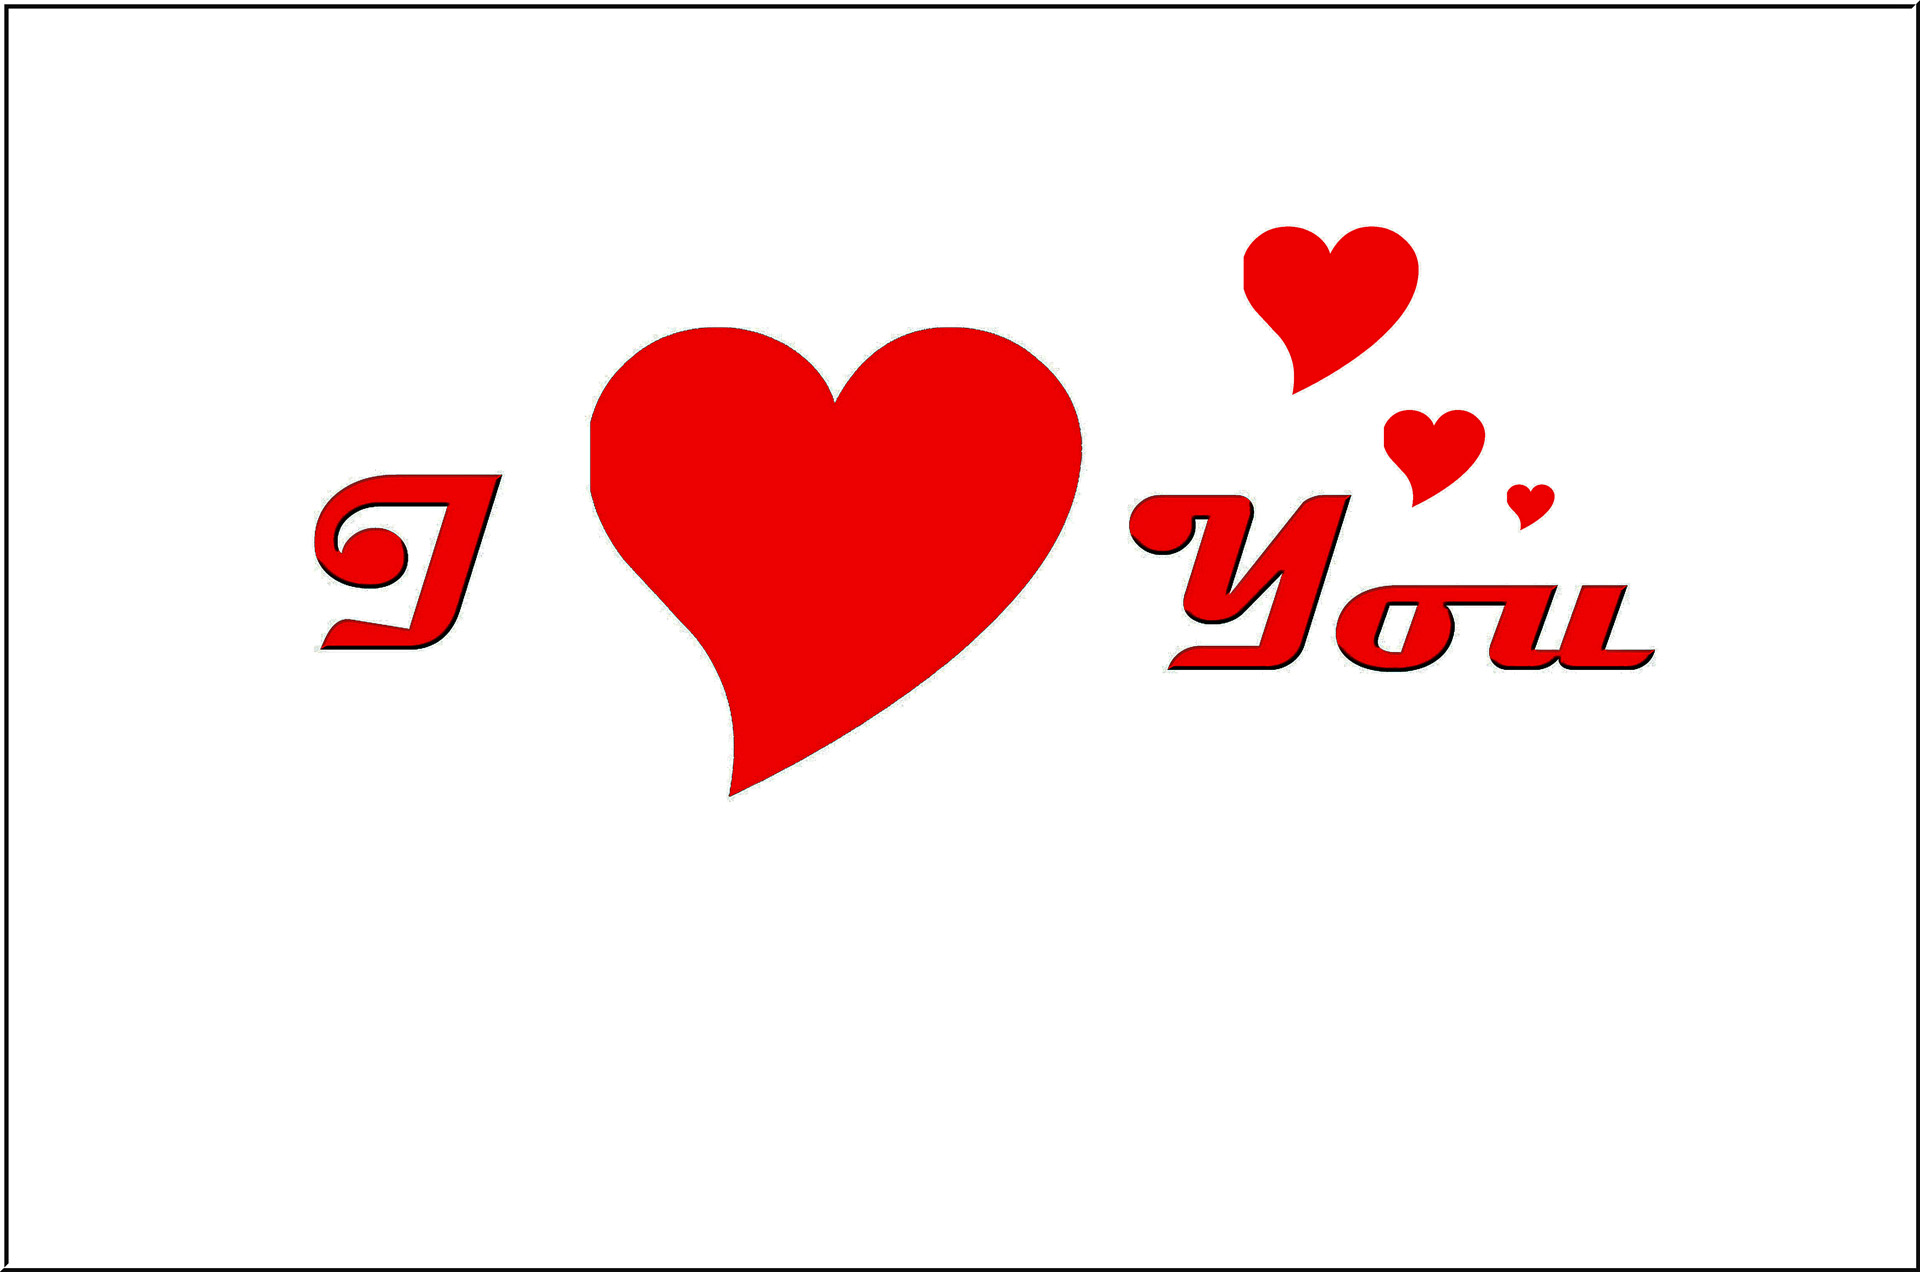 Free Free 269 I Cerealsly Love You Svg Free SVG PNG EPS DXF File